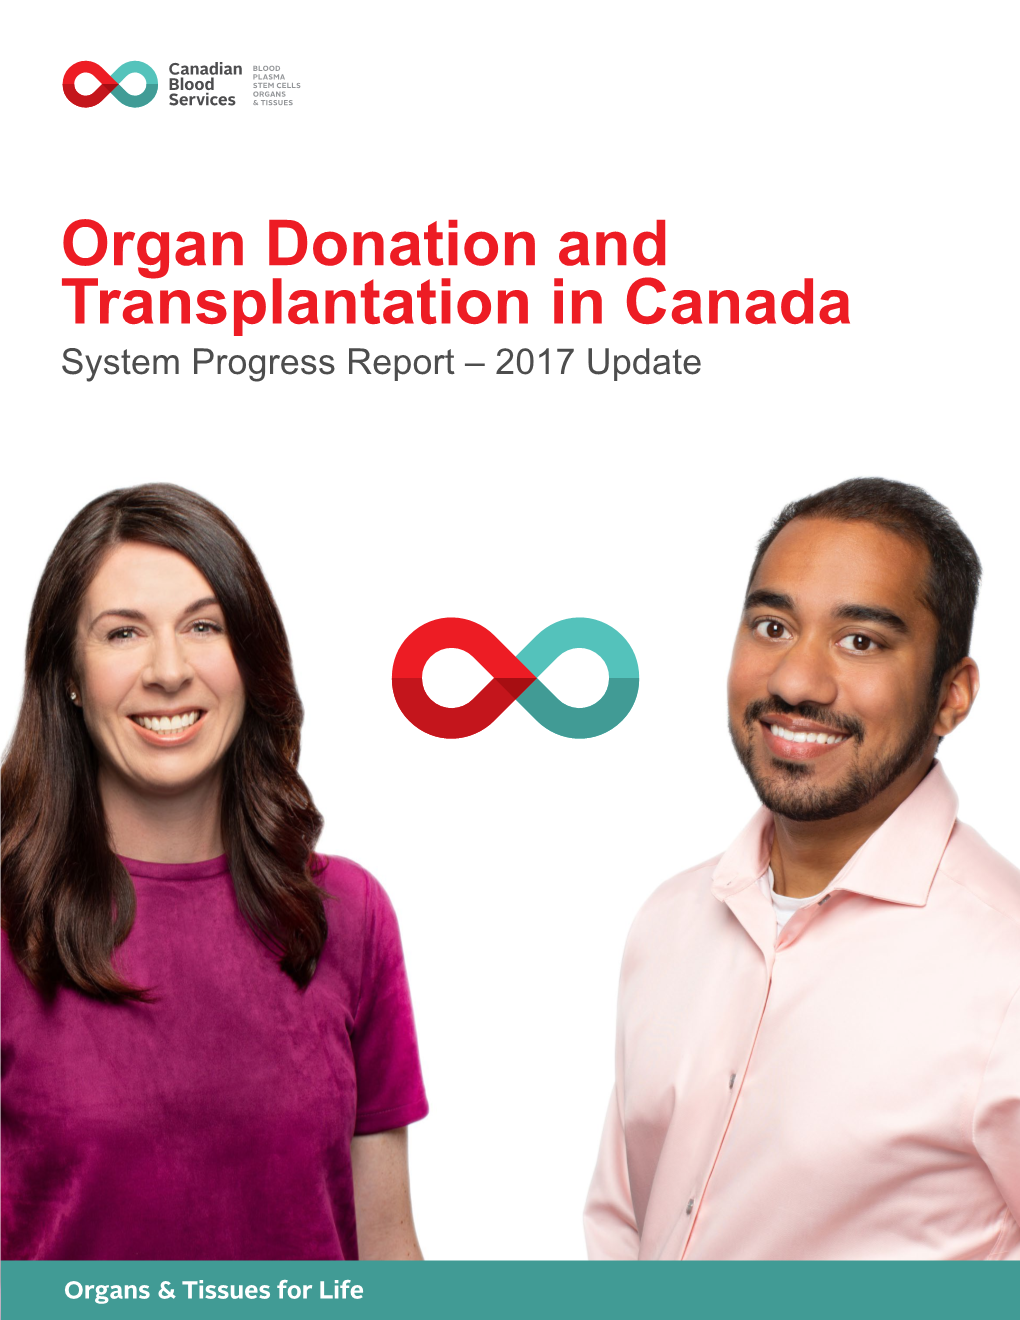 Organ Donation and Transplantation in Canada System Progress Report – 2017 Update Organ Donation and Transplantation in Canada System Progress Report – 2017 Update